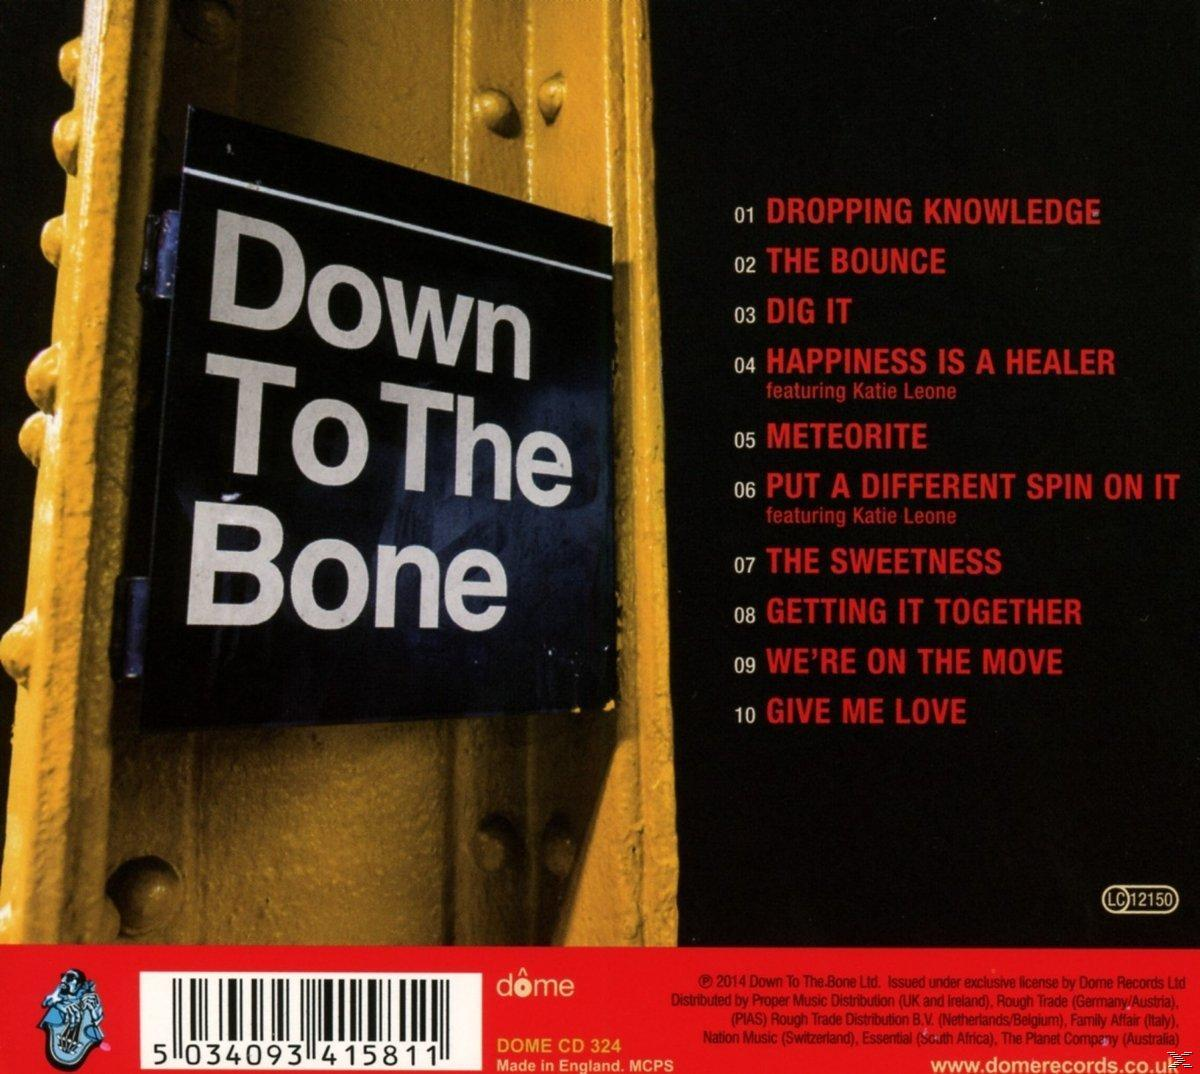 Down To Dig It (CD) Bone - The -